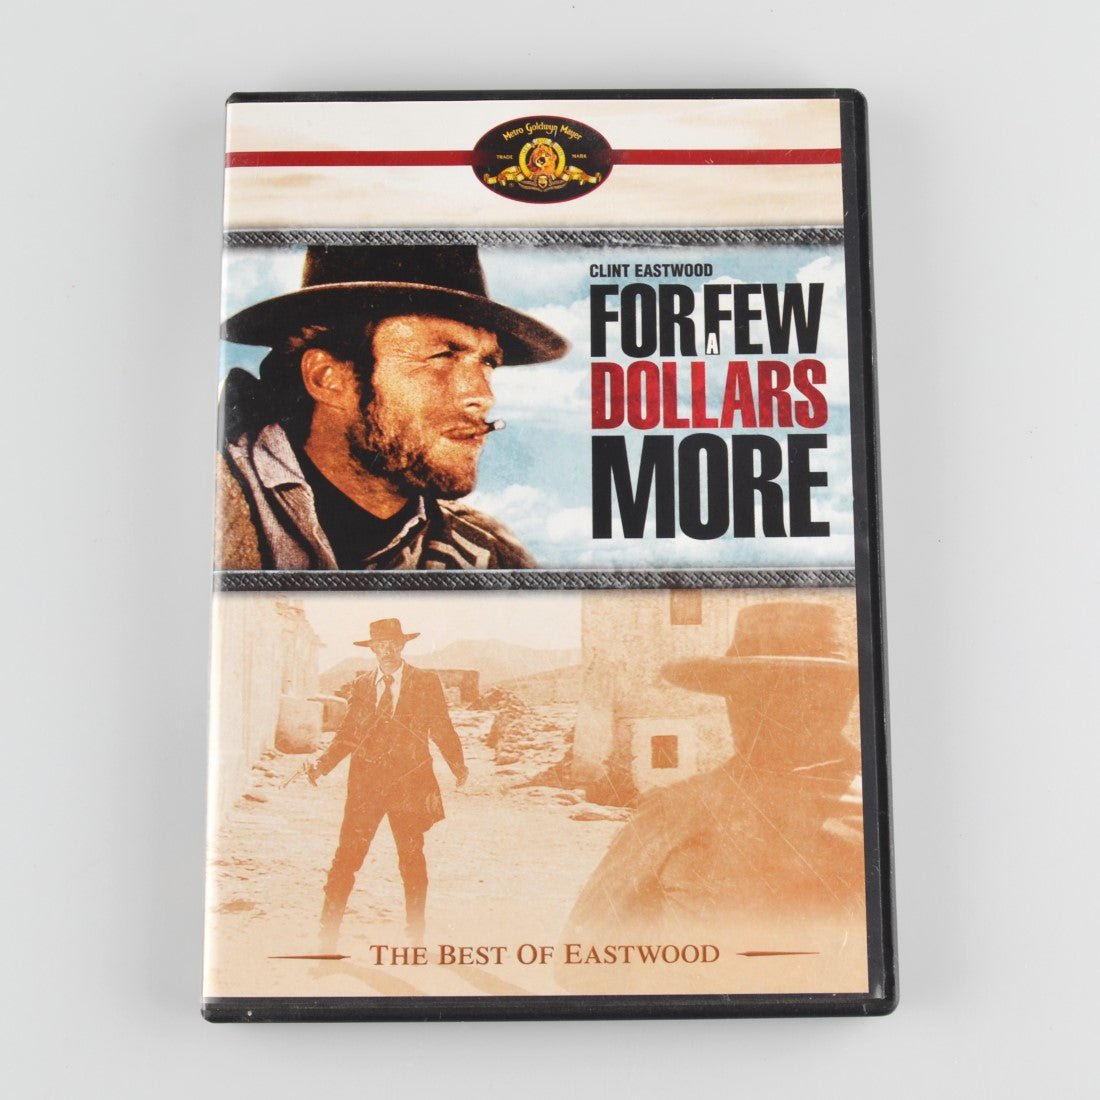 For A Few Dollars More (DVD, 1965) Clint Eastwood - Western